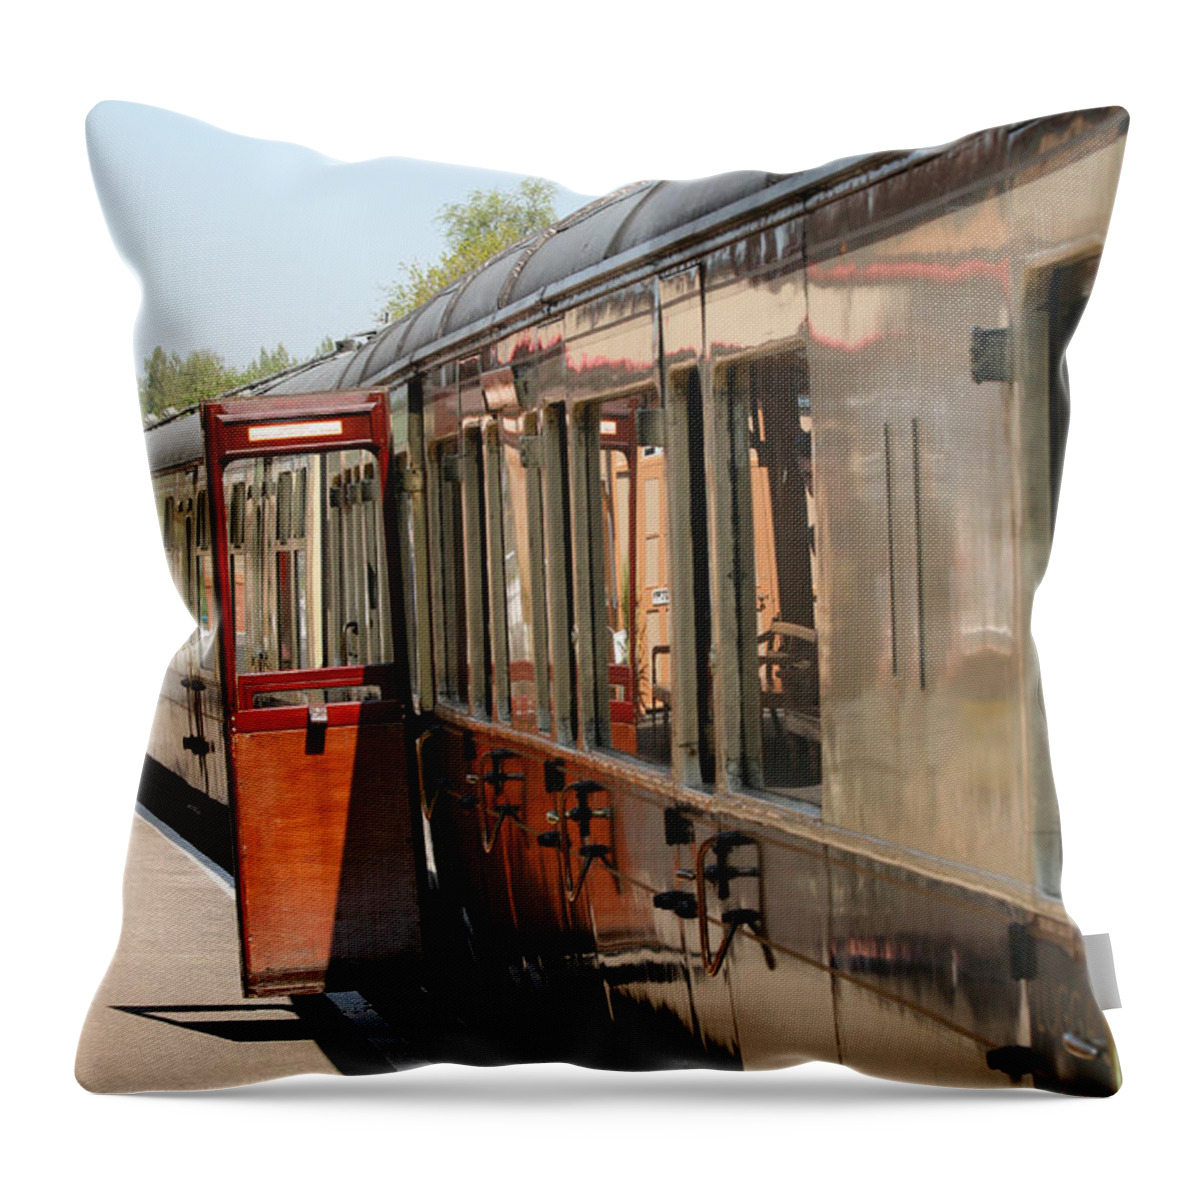 Train Throw Pillow featuring the photograph Train Transport by Sue Leonard